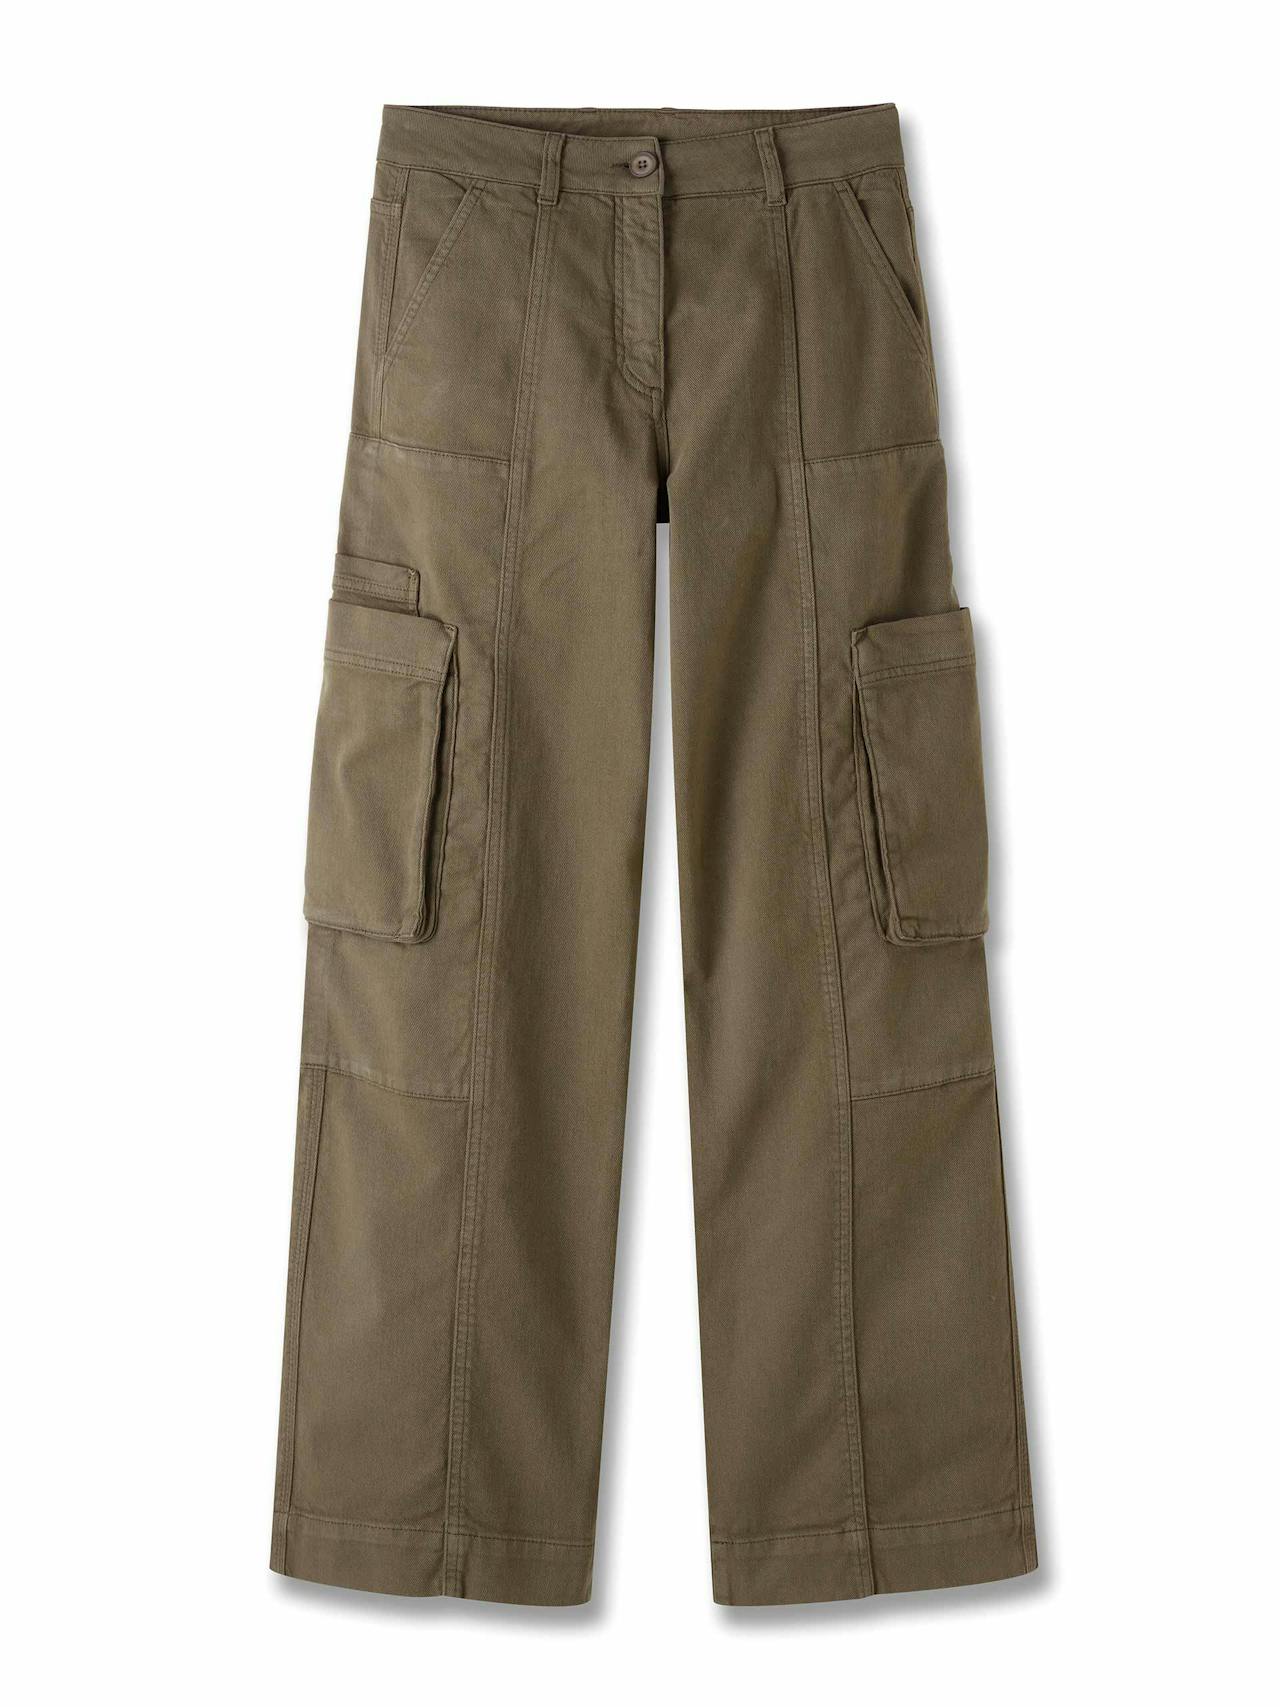 Cotton cargo trousers in Autumn Olive